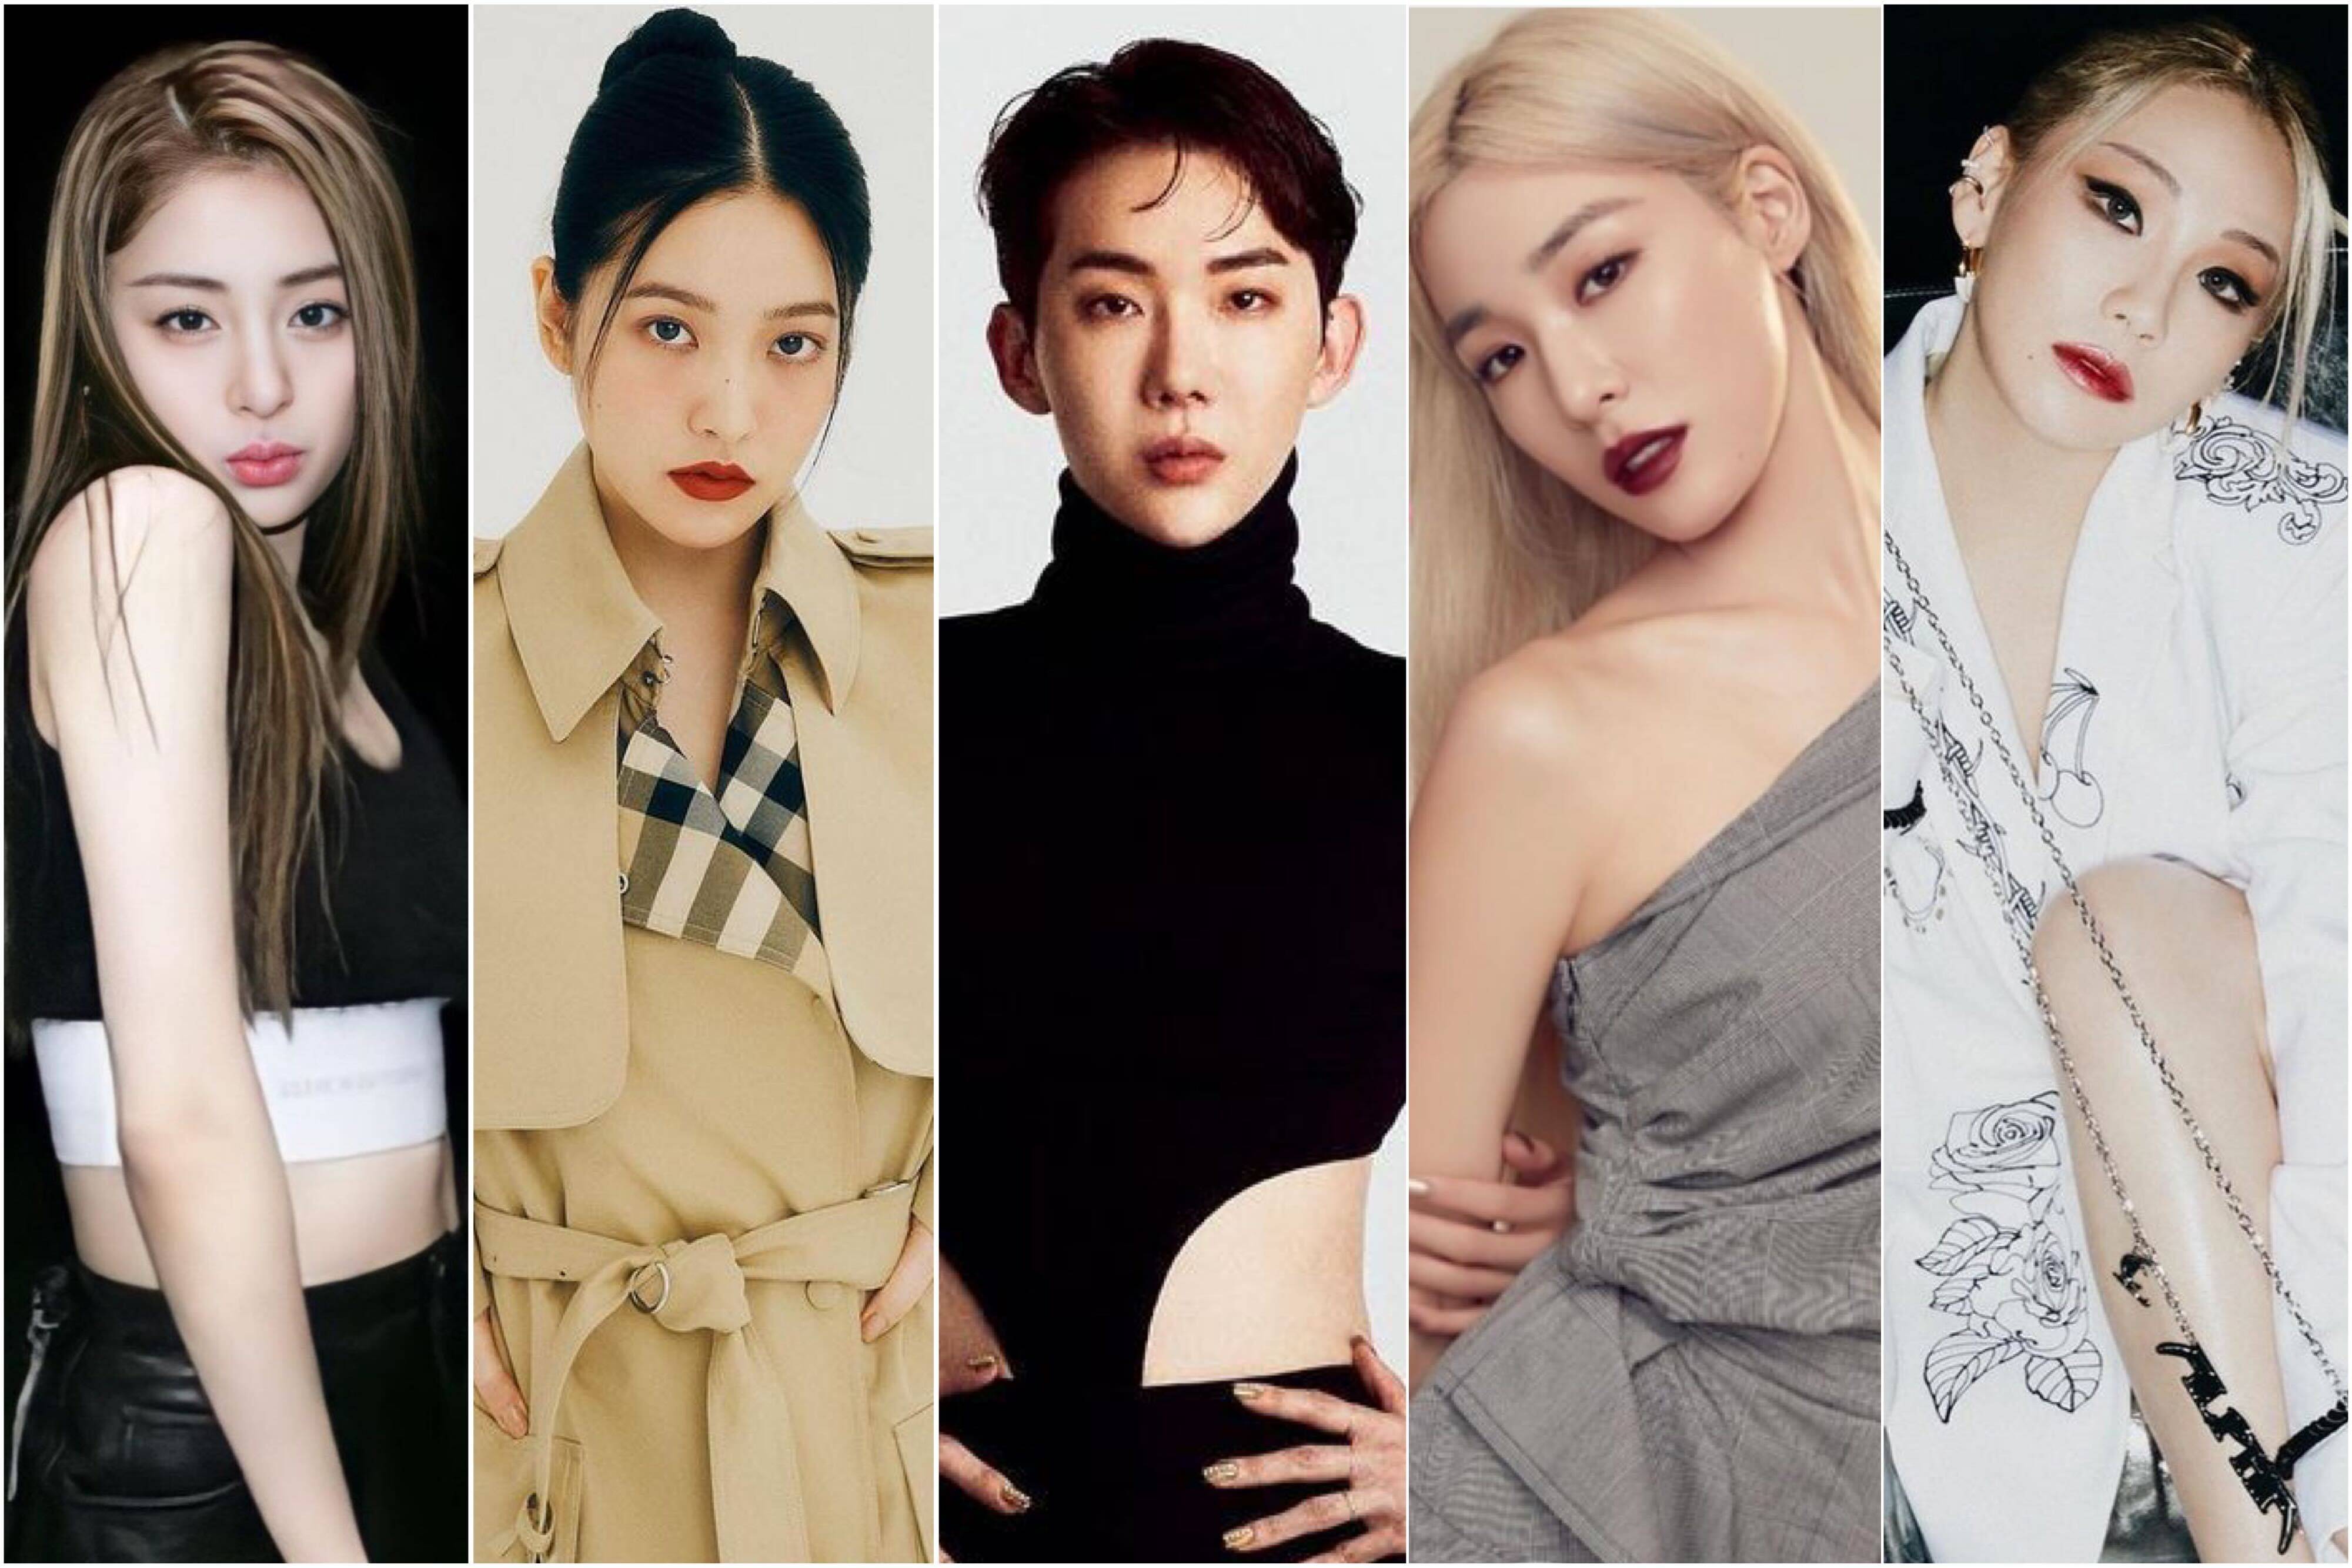 7 K-pop stars openly supporting the LGBT community, from Red Velvet's Yeri, Girls' Generation's 2NE1's and Le Sserafim's Yunjin – who a throwback pic celebrate Pride Month